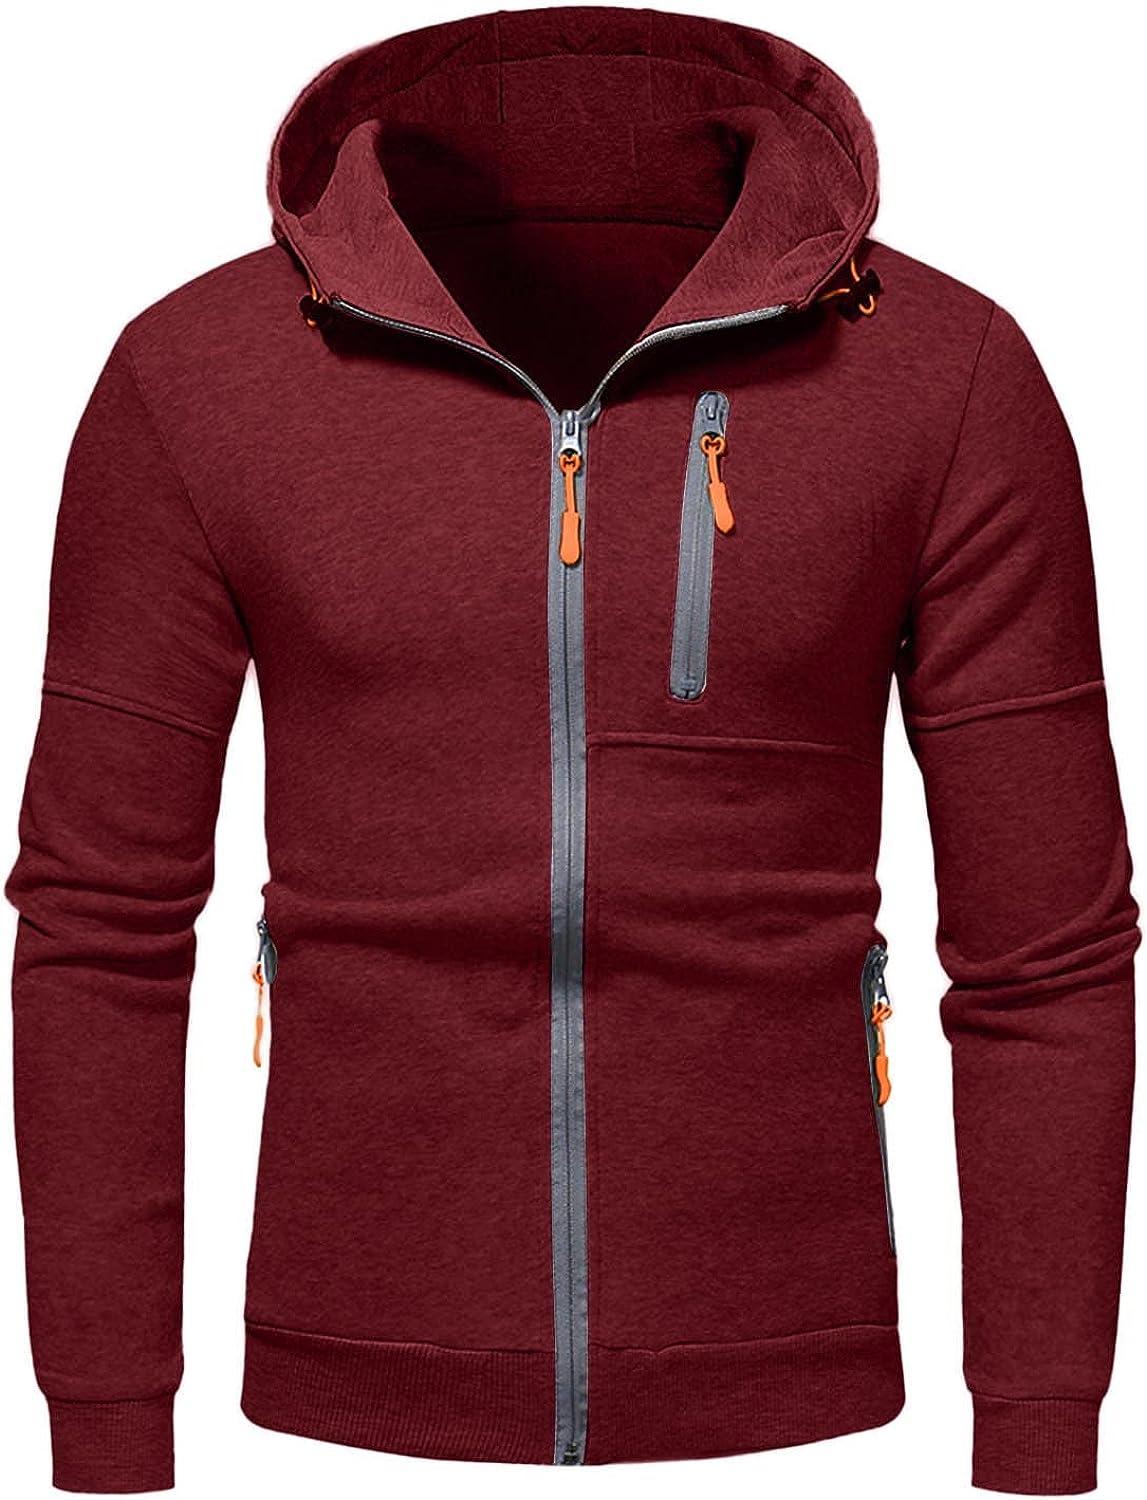 Hoodies for Men Zip Fashion Pullover Hoodie Athletic Workout Fit Cotton  Blend Hooed Sweatshirts Casual Long Sleeve Medium A1-red